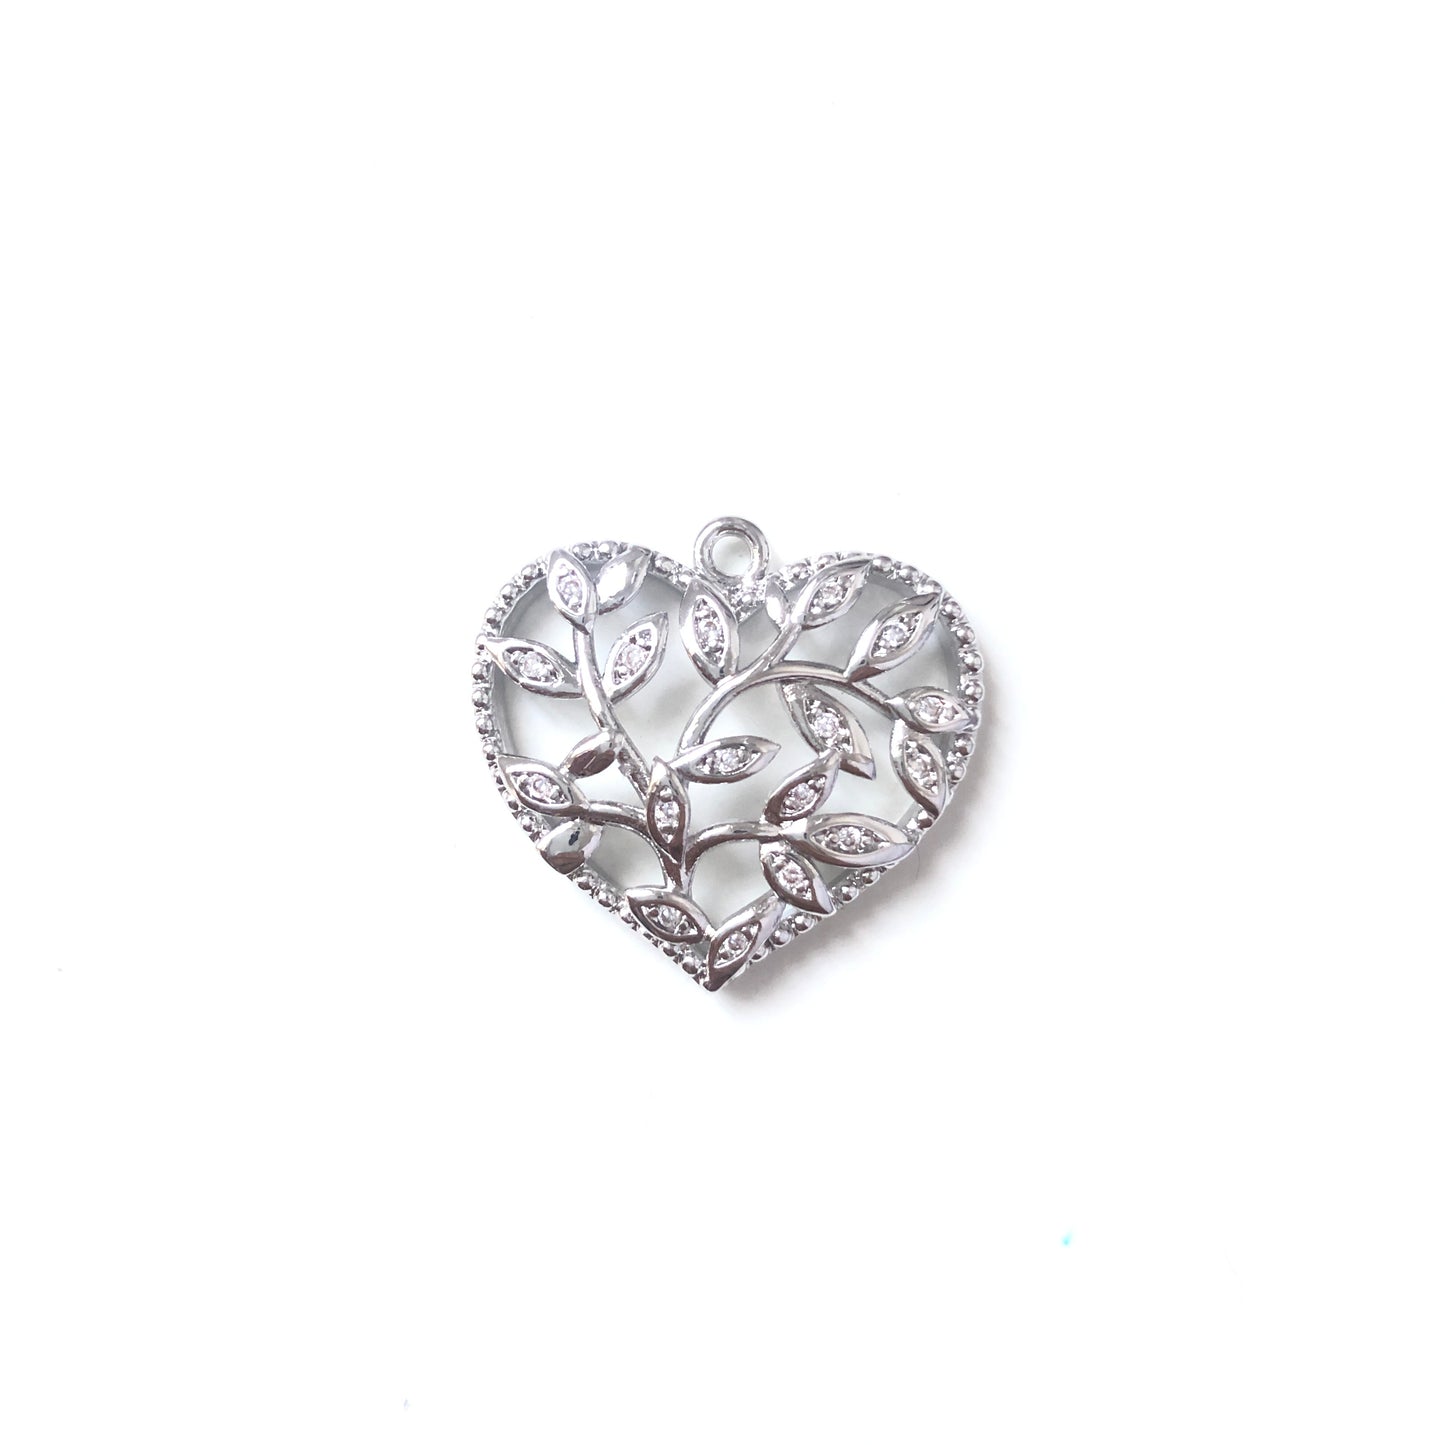 10pcs/lot 22.7*24mm CZ Paved Hollow Heart Charms Silver CZ Paved Charms Hearts Charms Beads Beyond